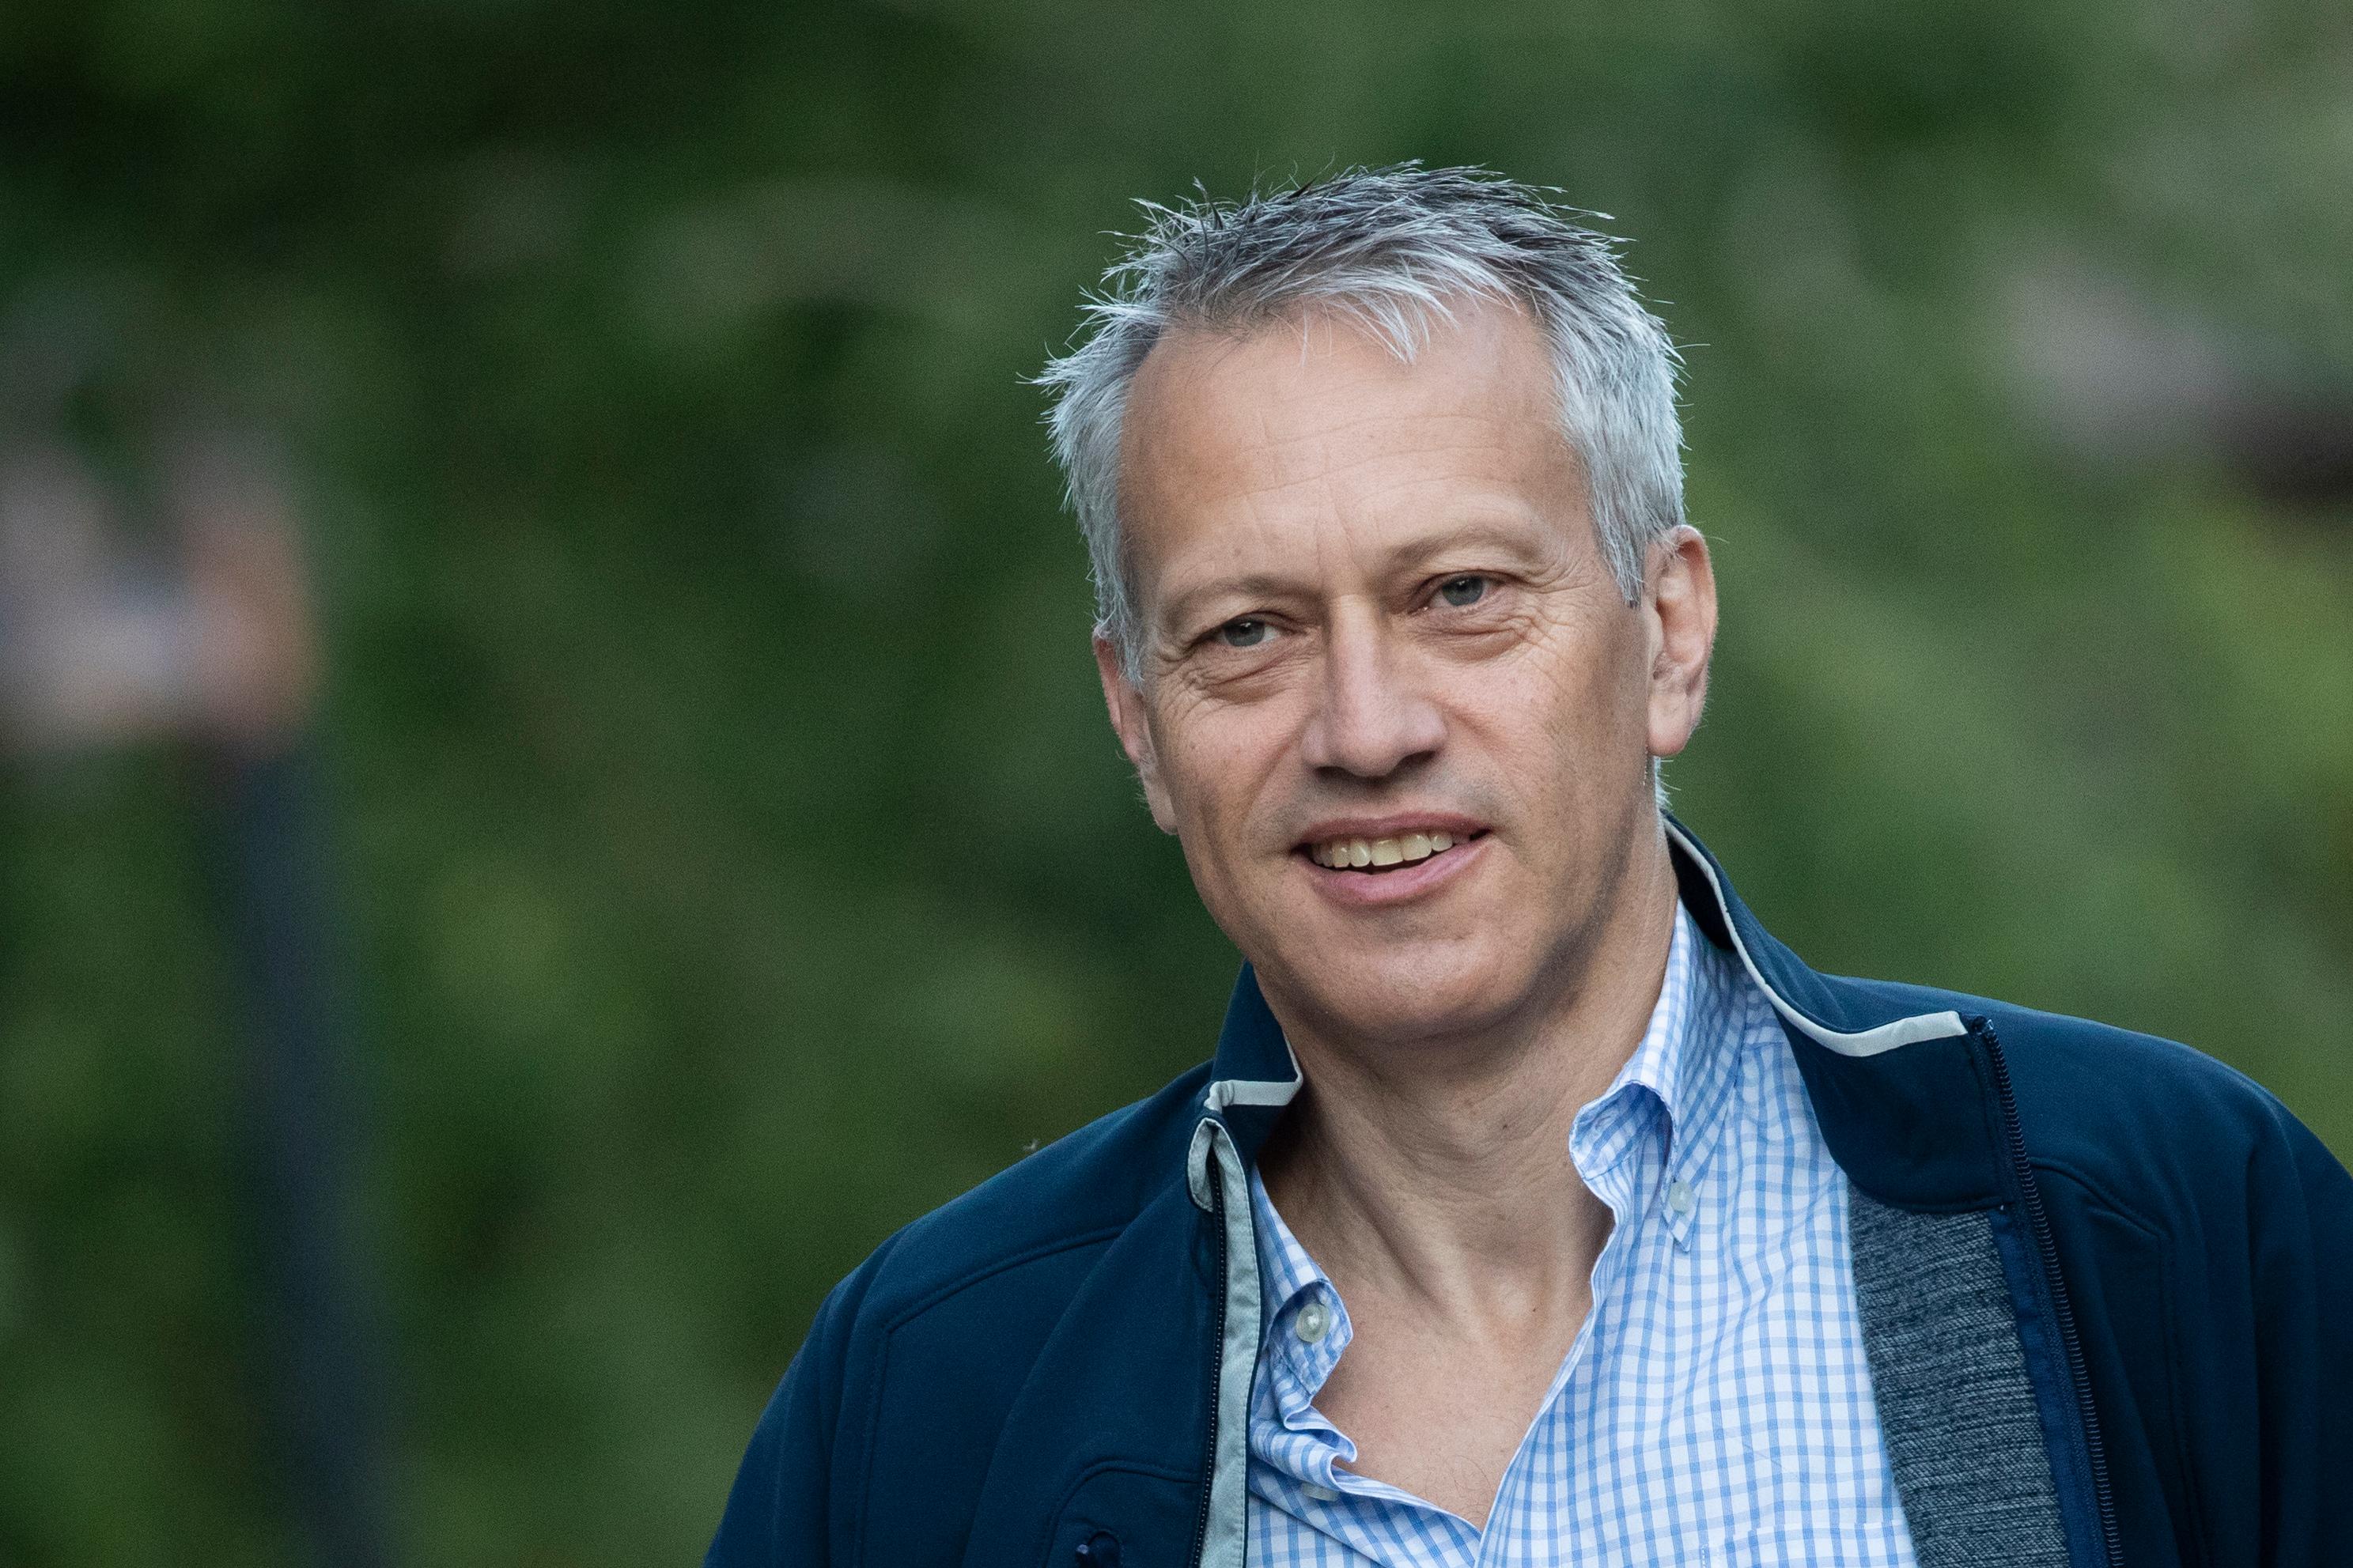 James Quincey, chief executive officer of the Coca-Cola Company